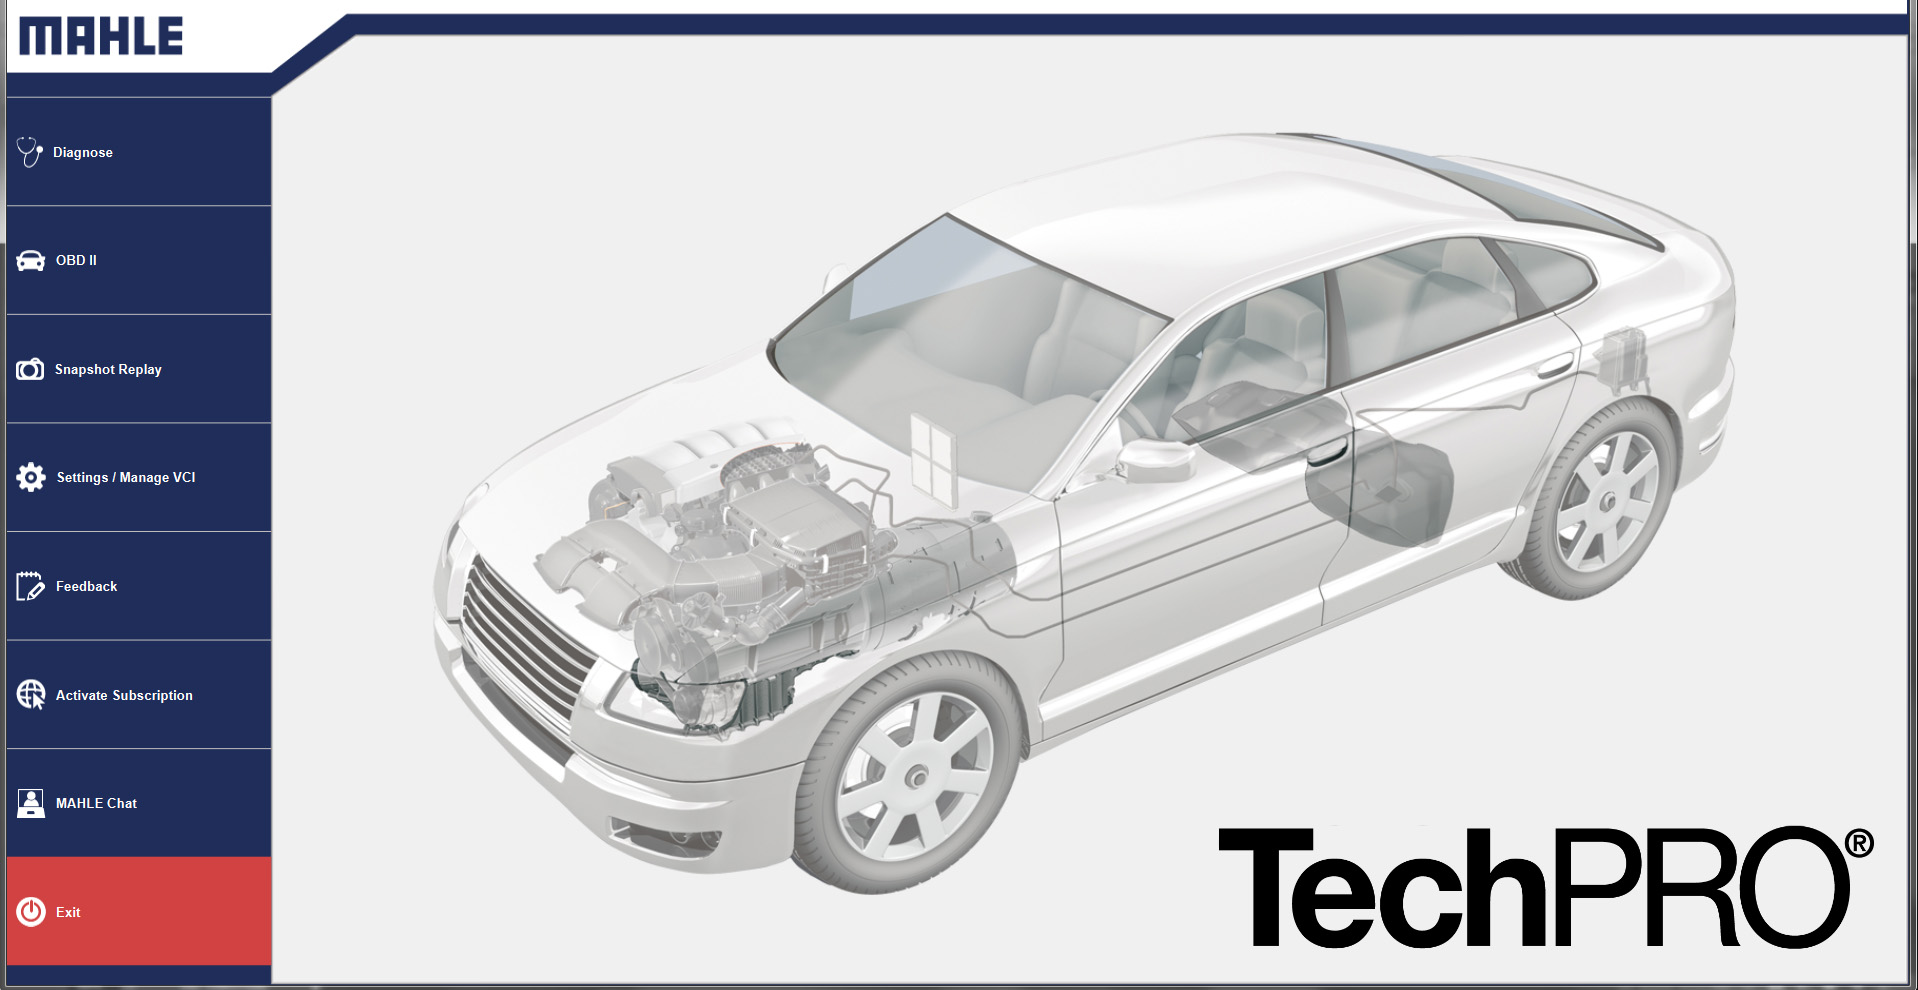 TechPRO diagnostic tool home page with navigation bar and image of interior of a sedan. 